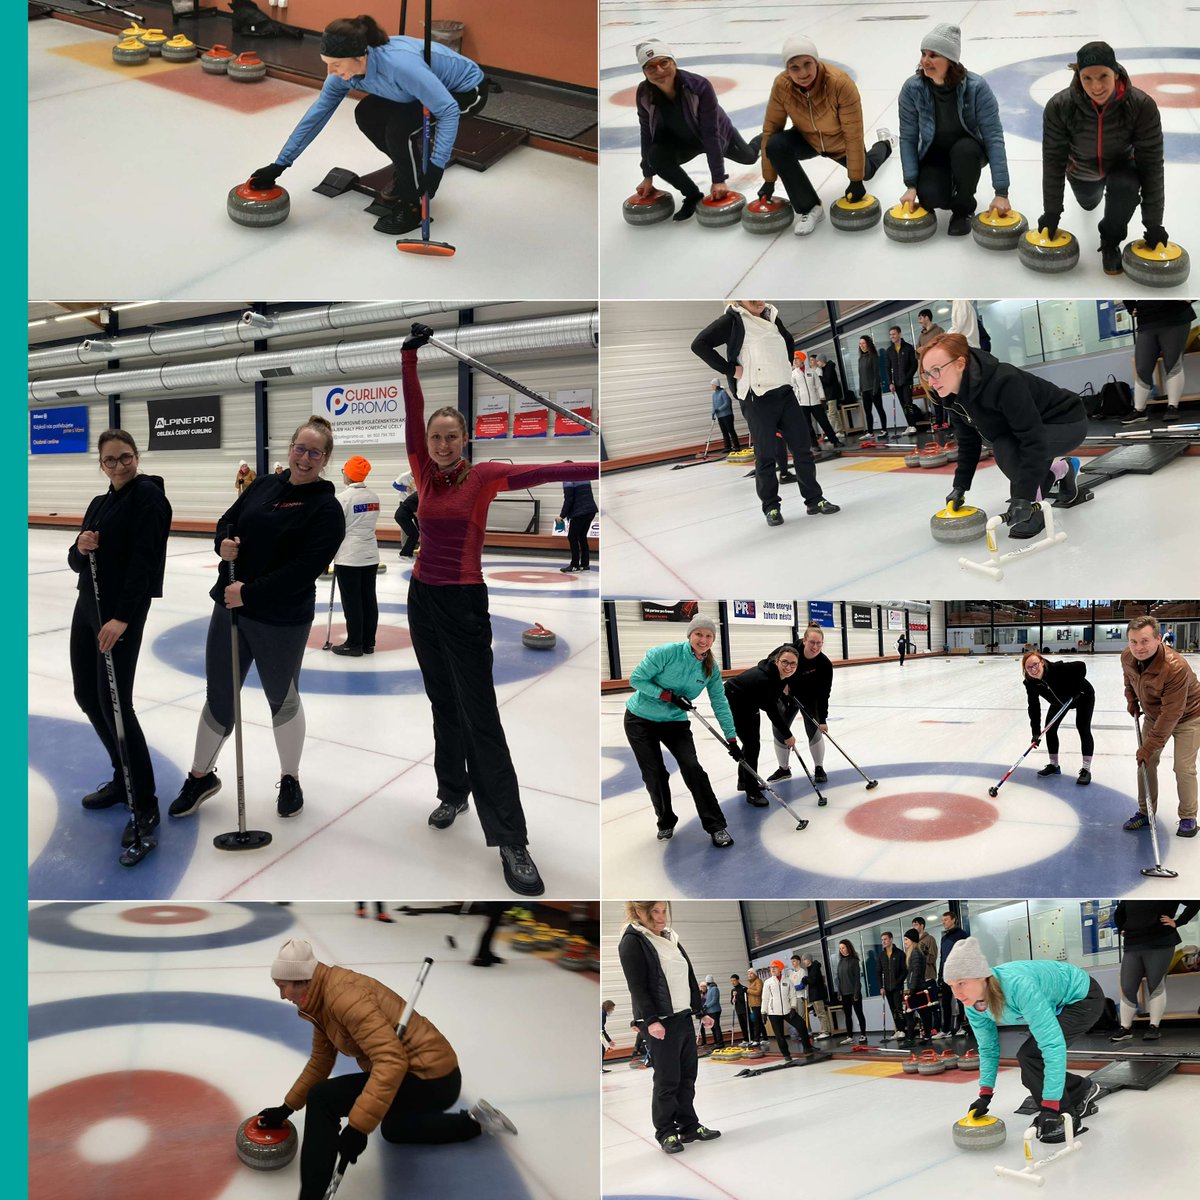 🇨🇿 #teamSPB Prague took to the ice earlier this week to try out something new for their team get-together! 🥌 Resident curler Simona led the group as they embraced the ice and enjoyed a fun and challenging curling session together.